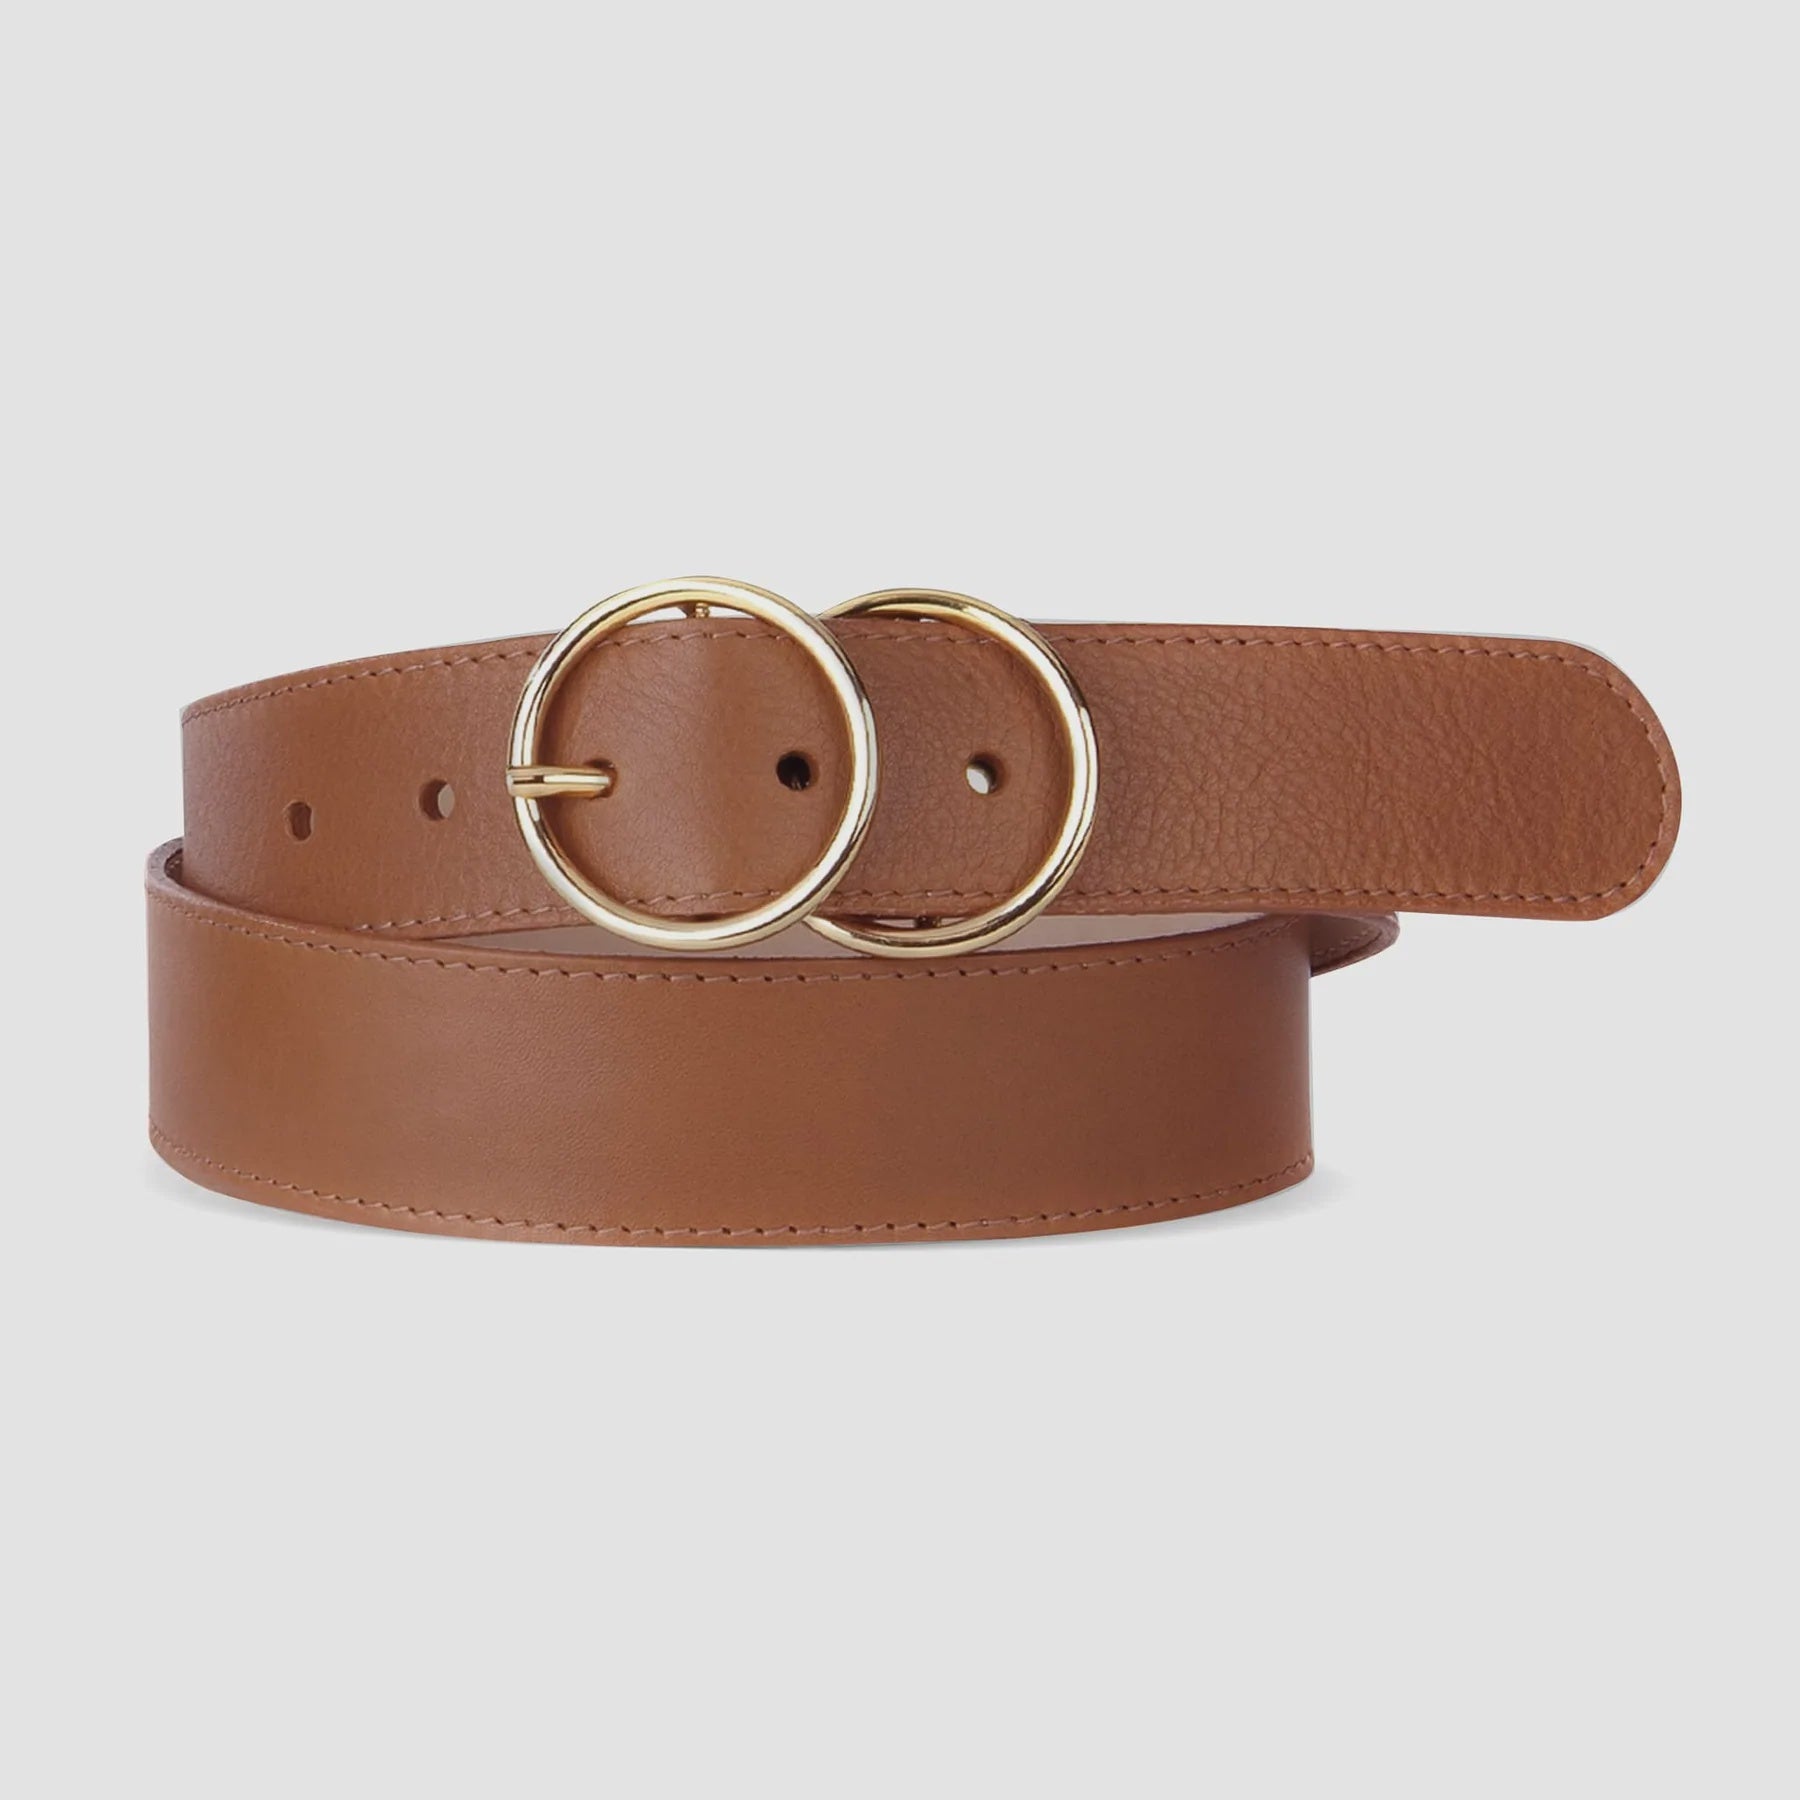 BRAVE LEATHER - WOMEN'S YAHOLO BELT IN TAN LEATHER/GOLD HARDWARE